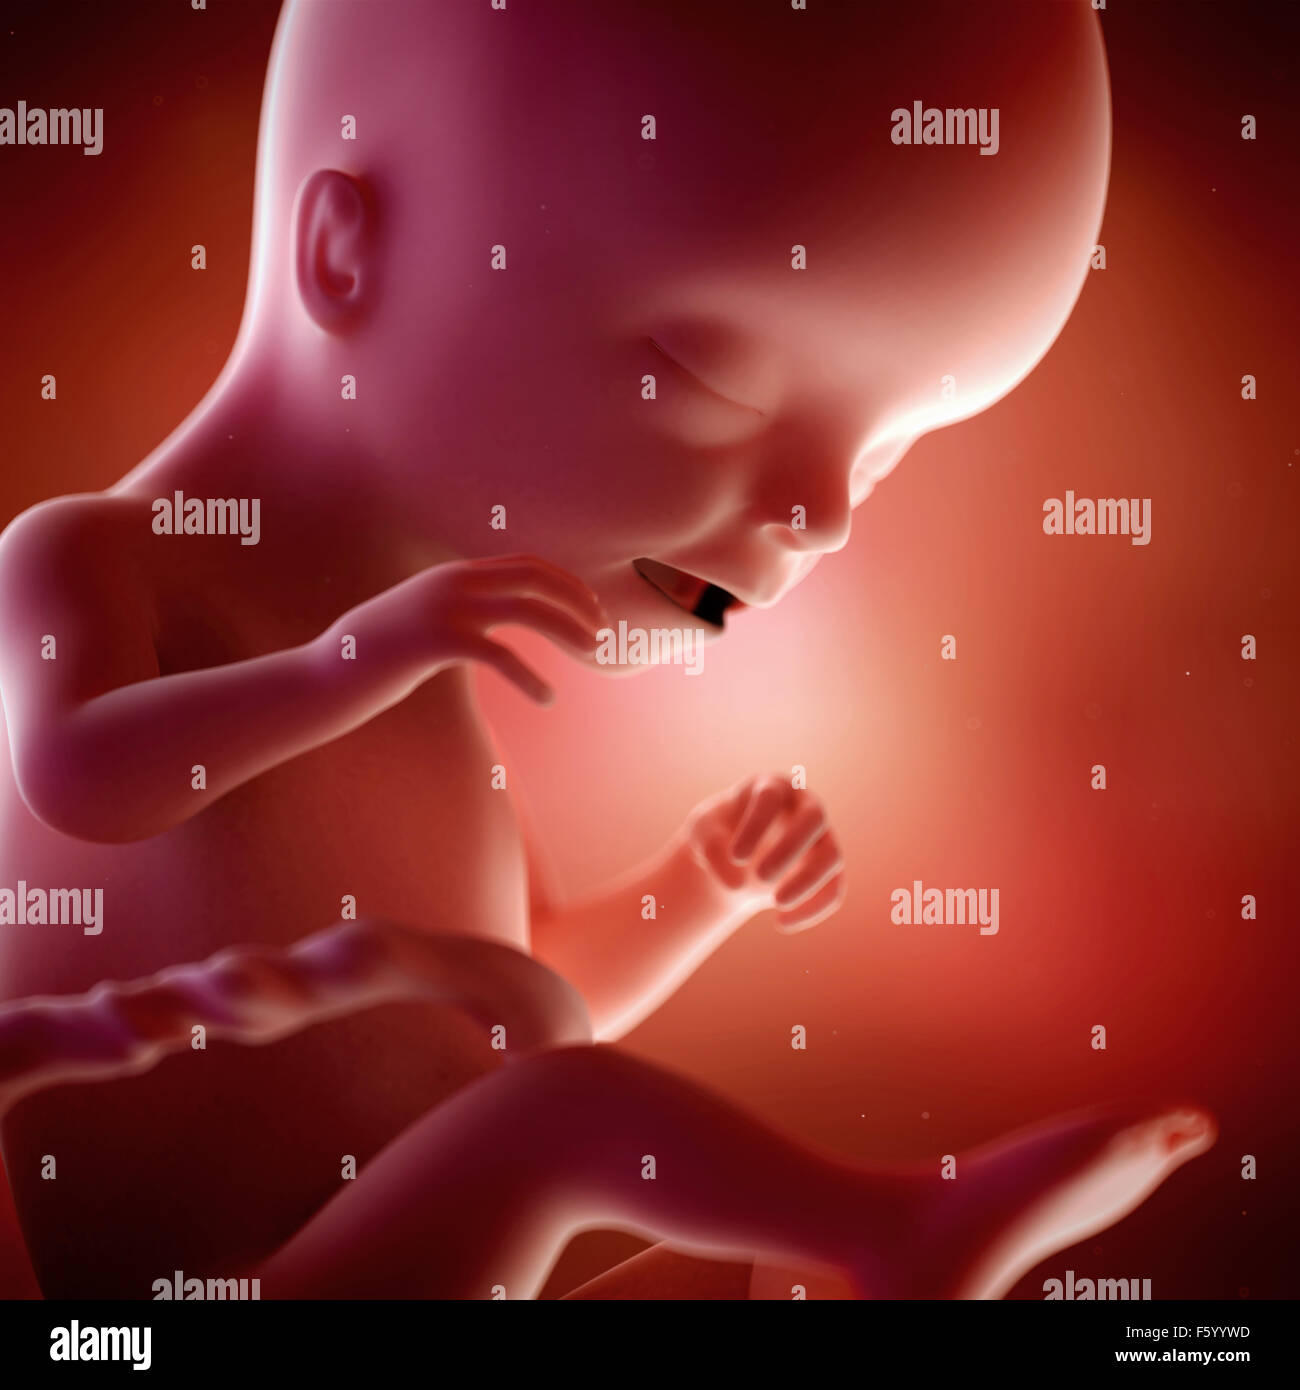 medical accurate 3d illustration of a fetus week 17 Stock Photo